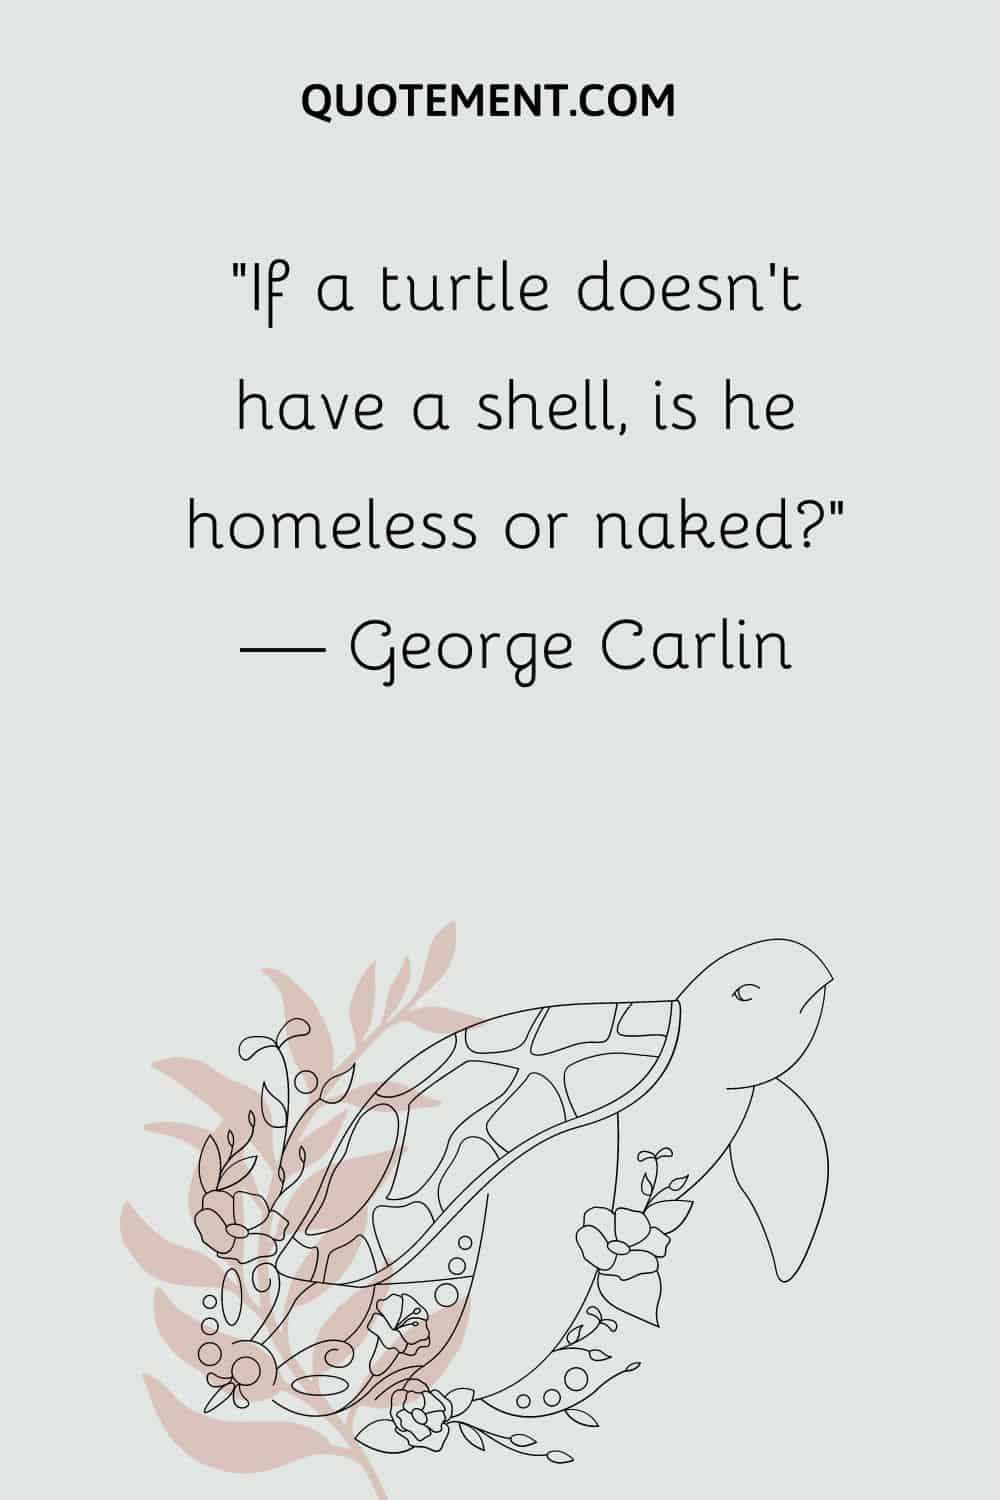 If a turtle doesn’t have a shell, is he homeless or naked